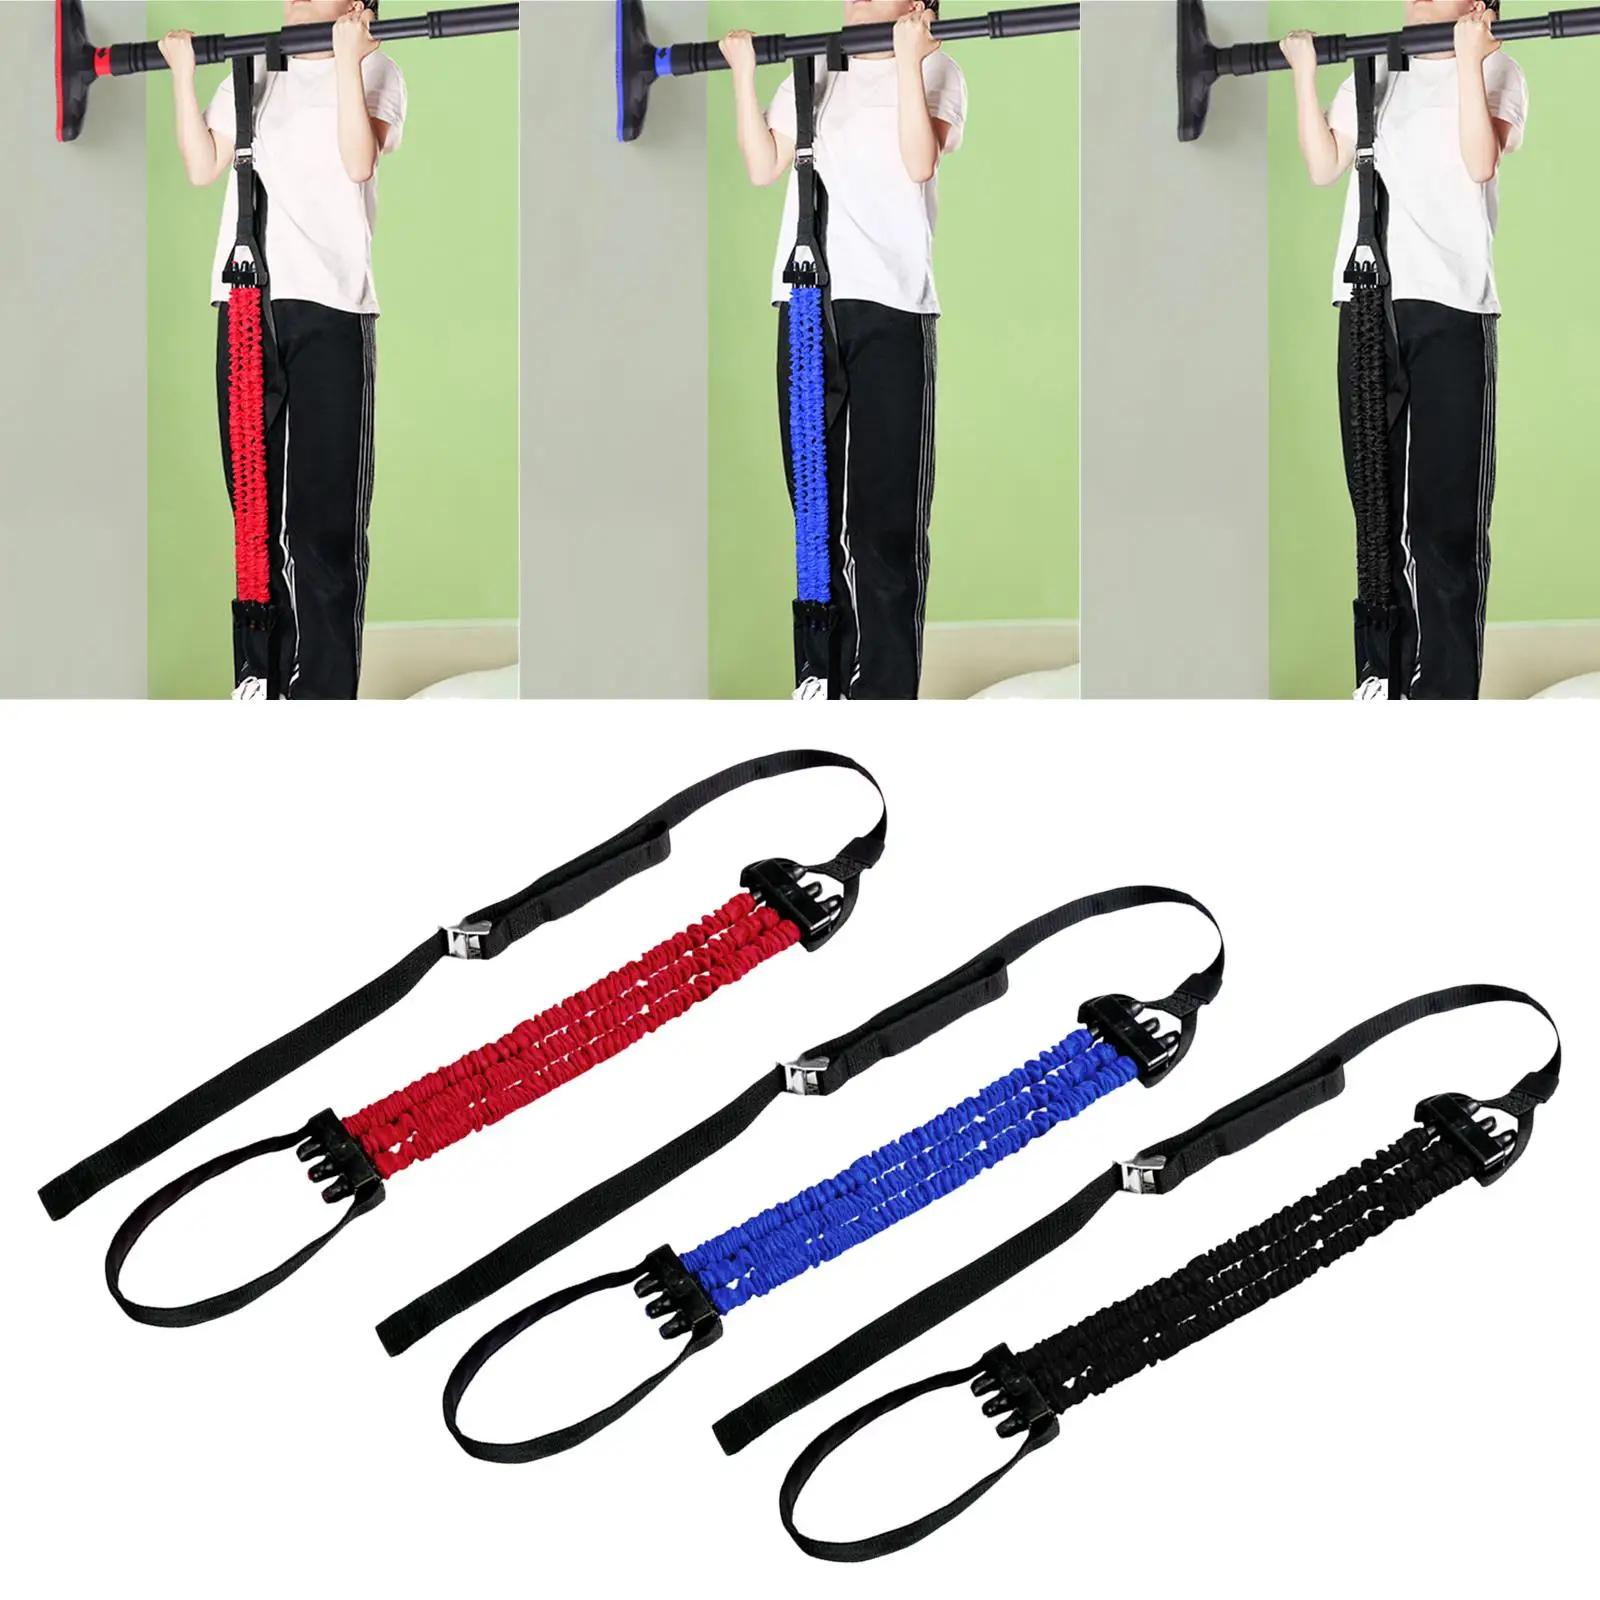 Chin Up Assist Band Resistance Bands for Strength Training Exercise Home Gym